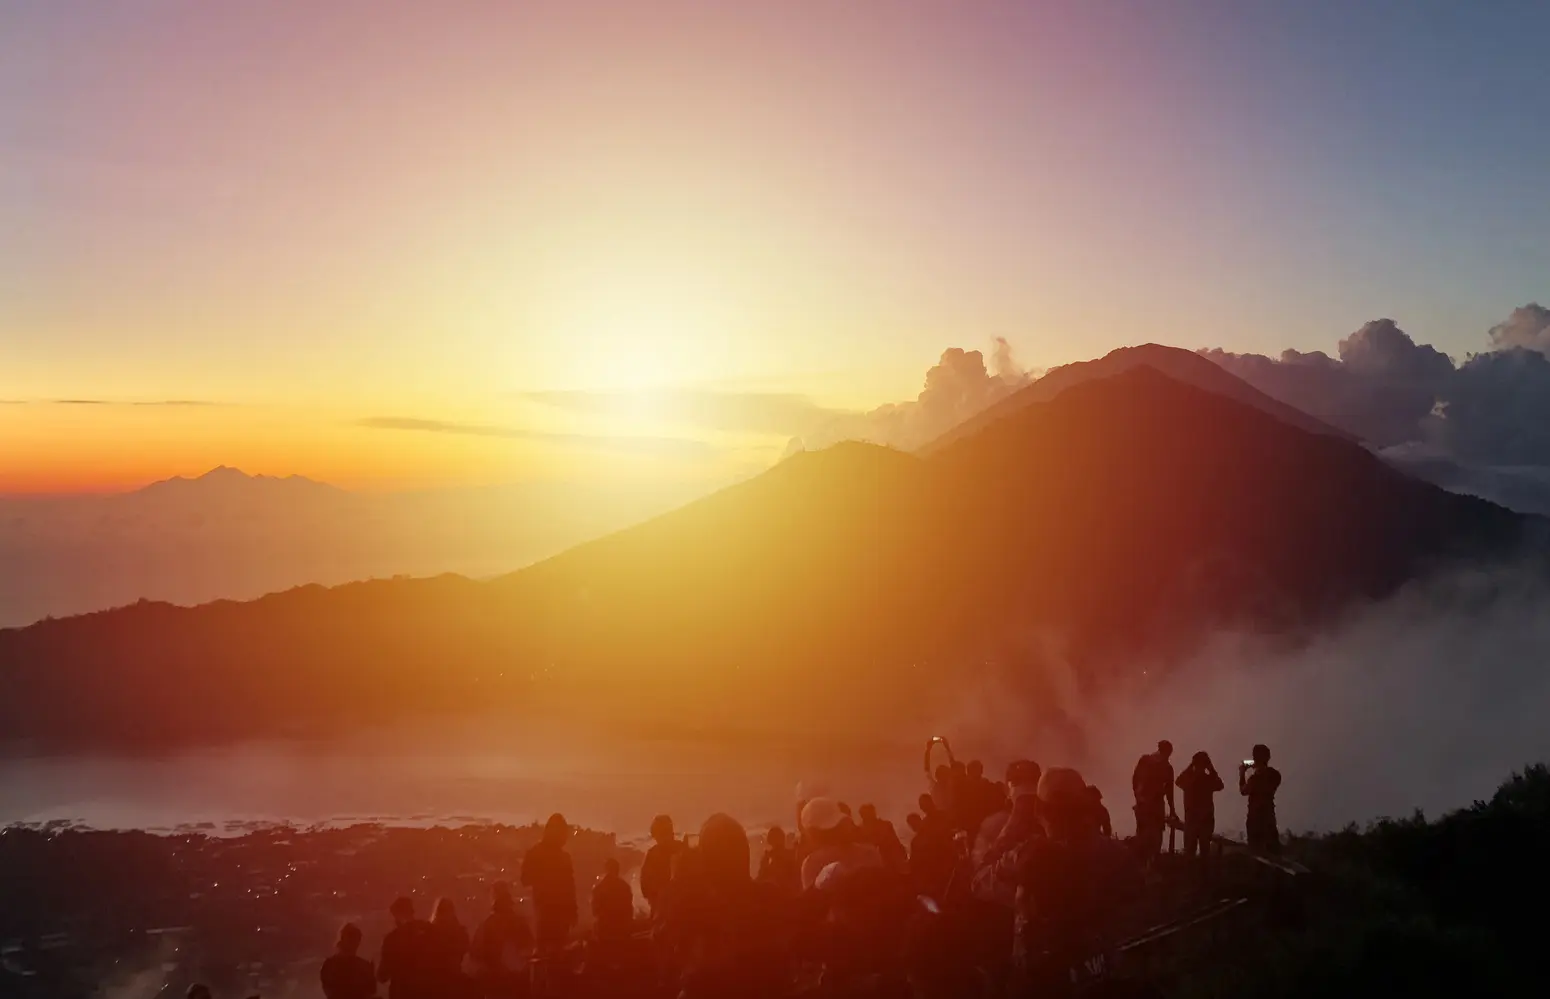 A group of people standing on Mount Batur watching the yellow and orange sunrise over the mountains, one of the top things to do in Bali.